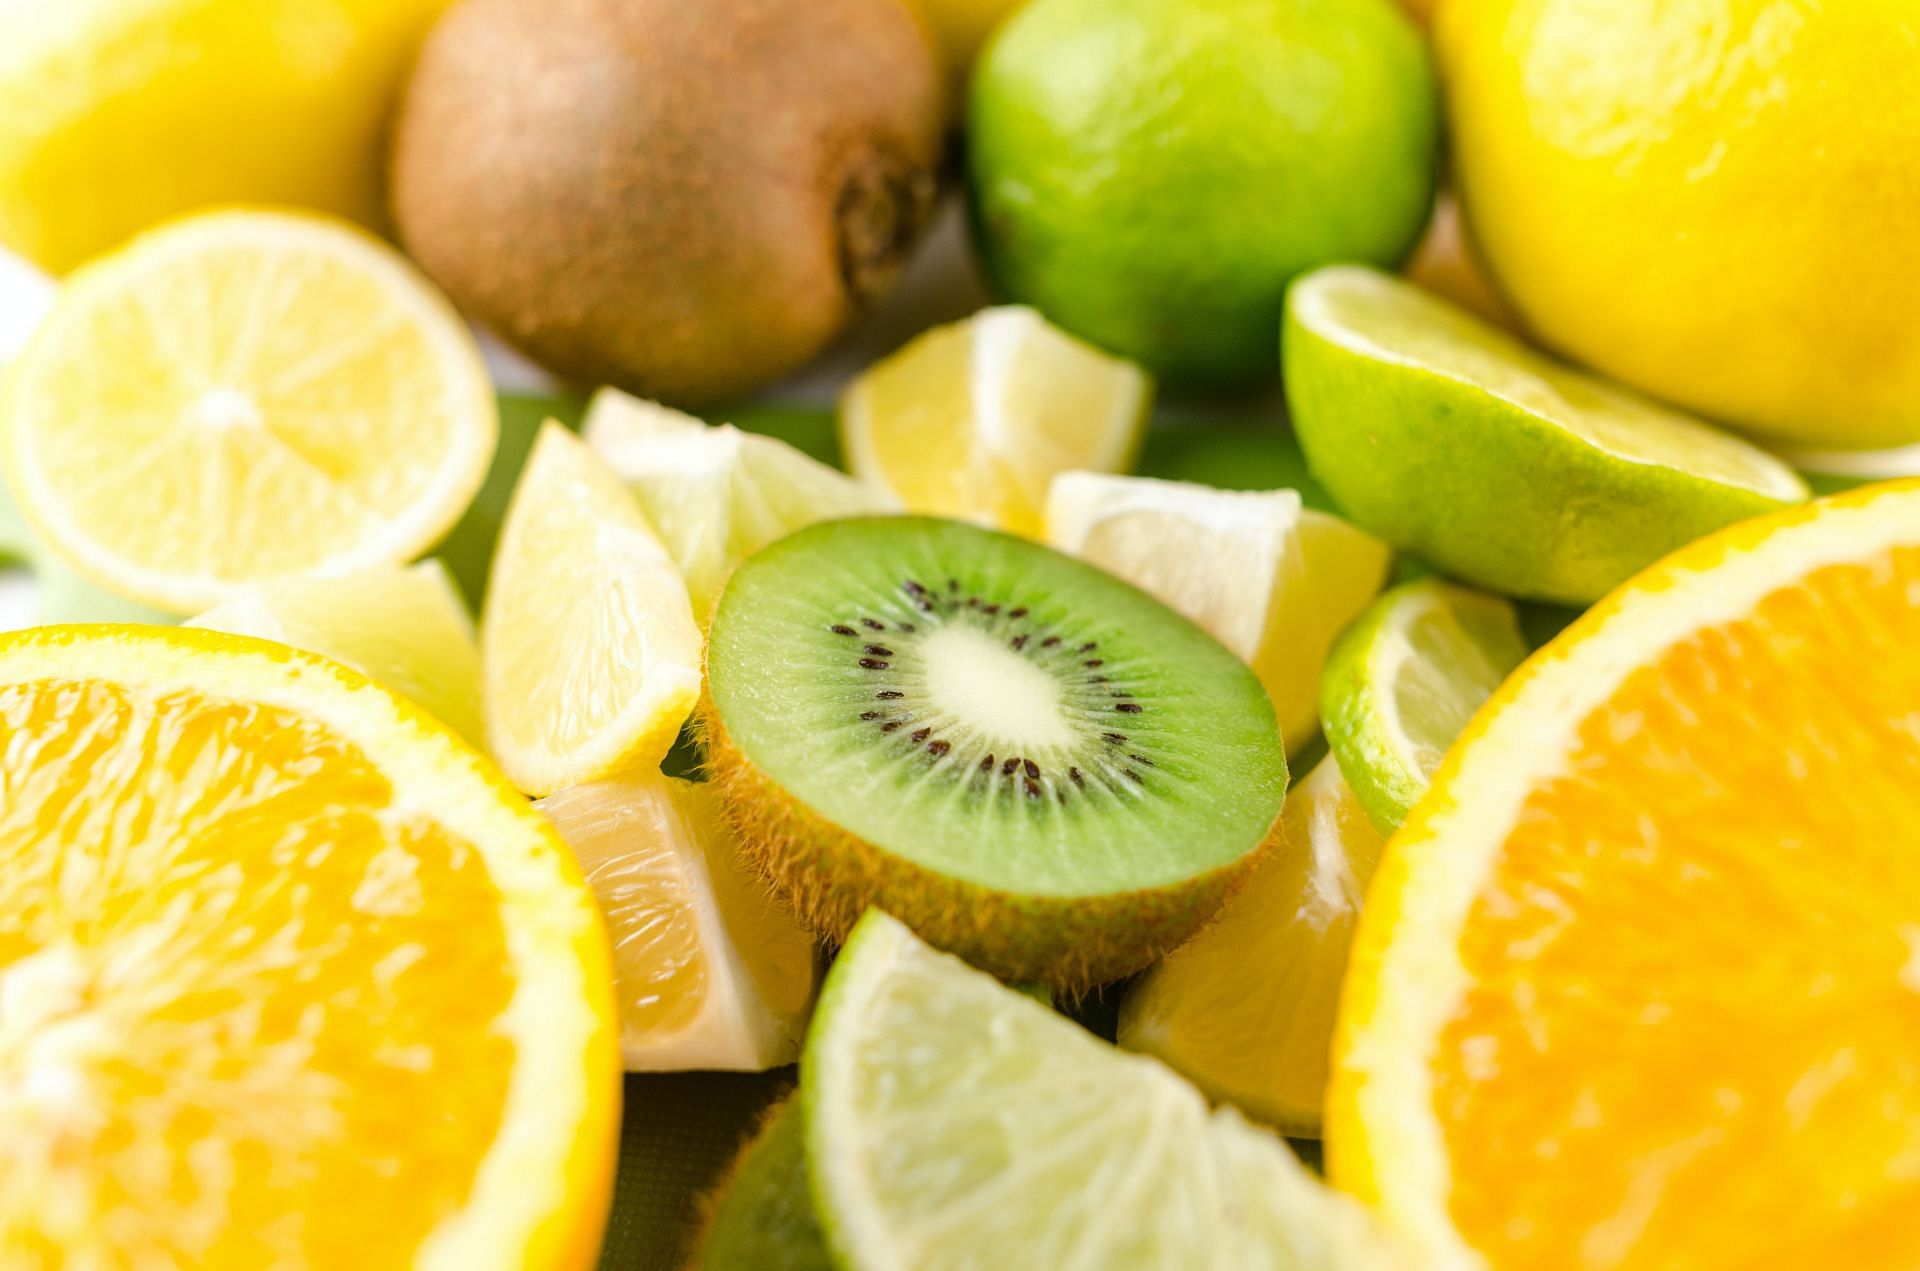 Kiwis, Lemons and other citrus fruits are sources of vitamin C (Image via Pexels).